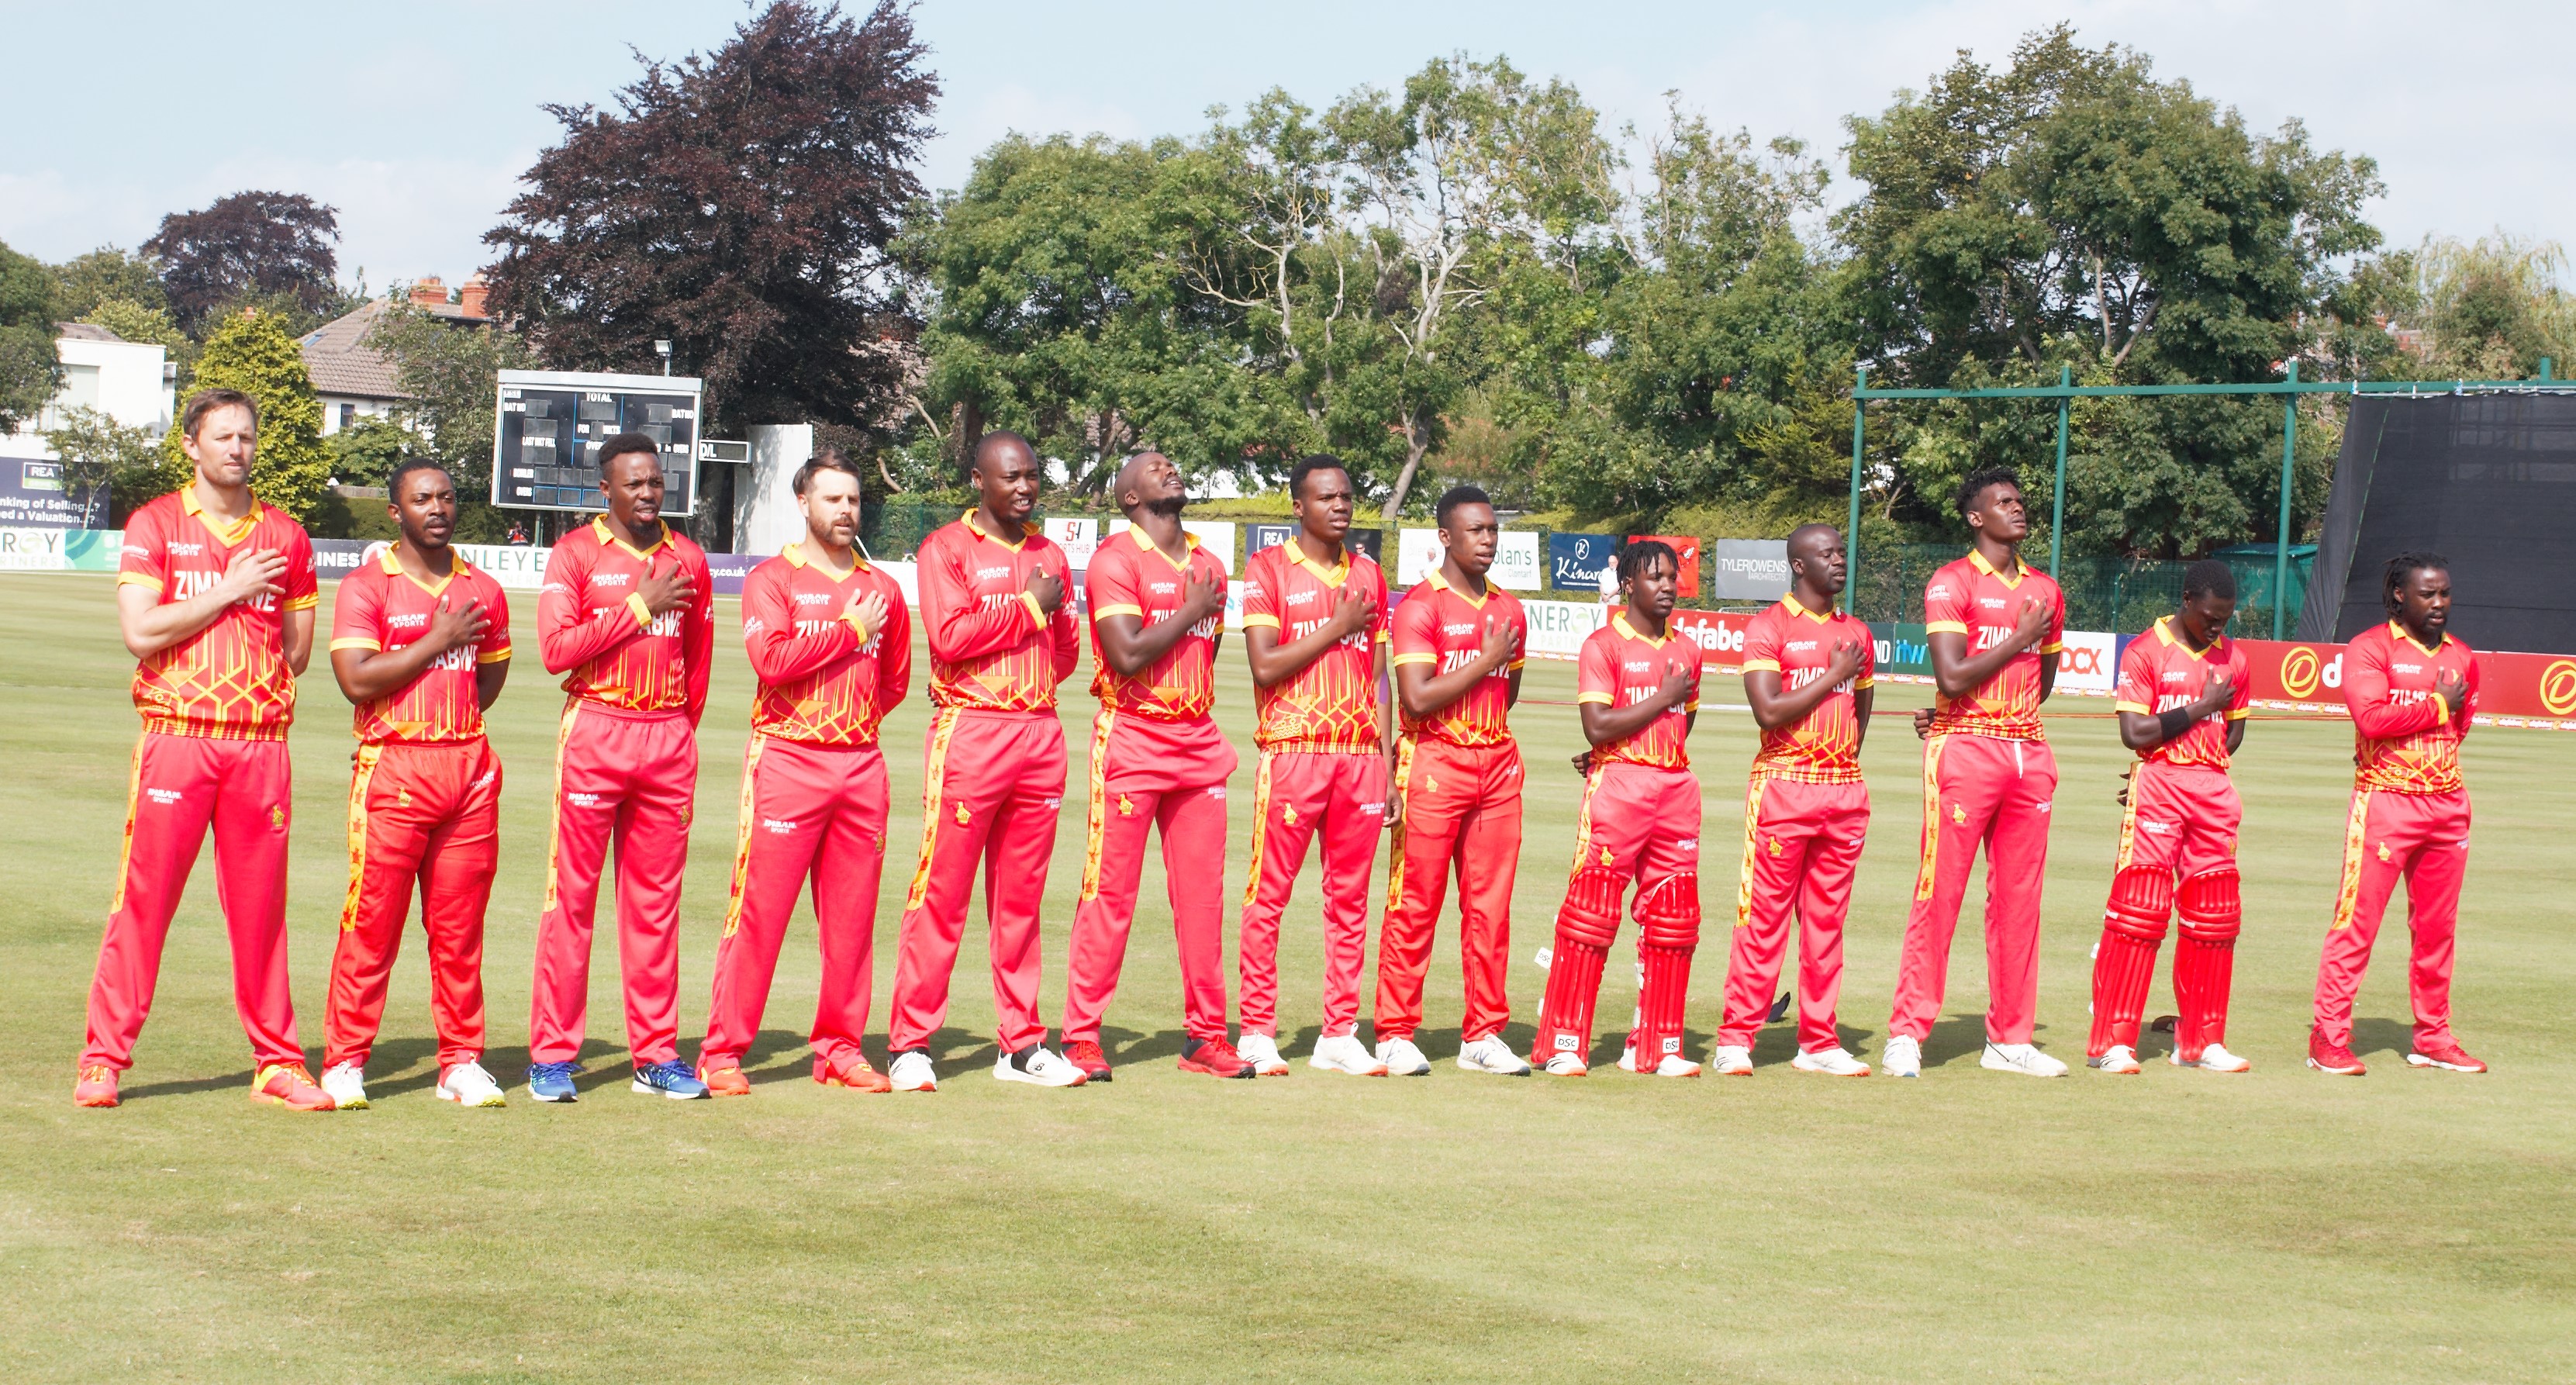 IRE vs ZIM | The boys came out with fire and energy to defend the total, states Craig Ervine